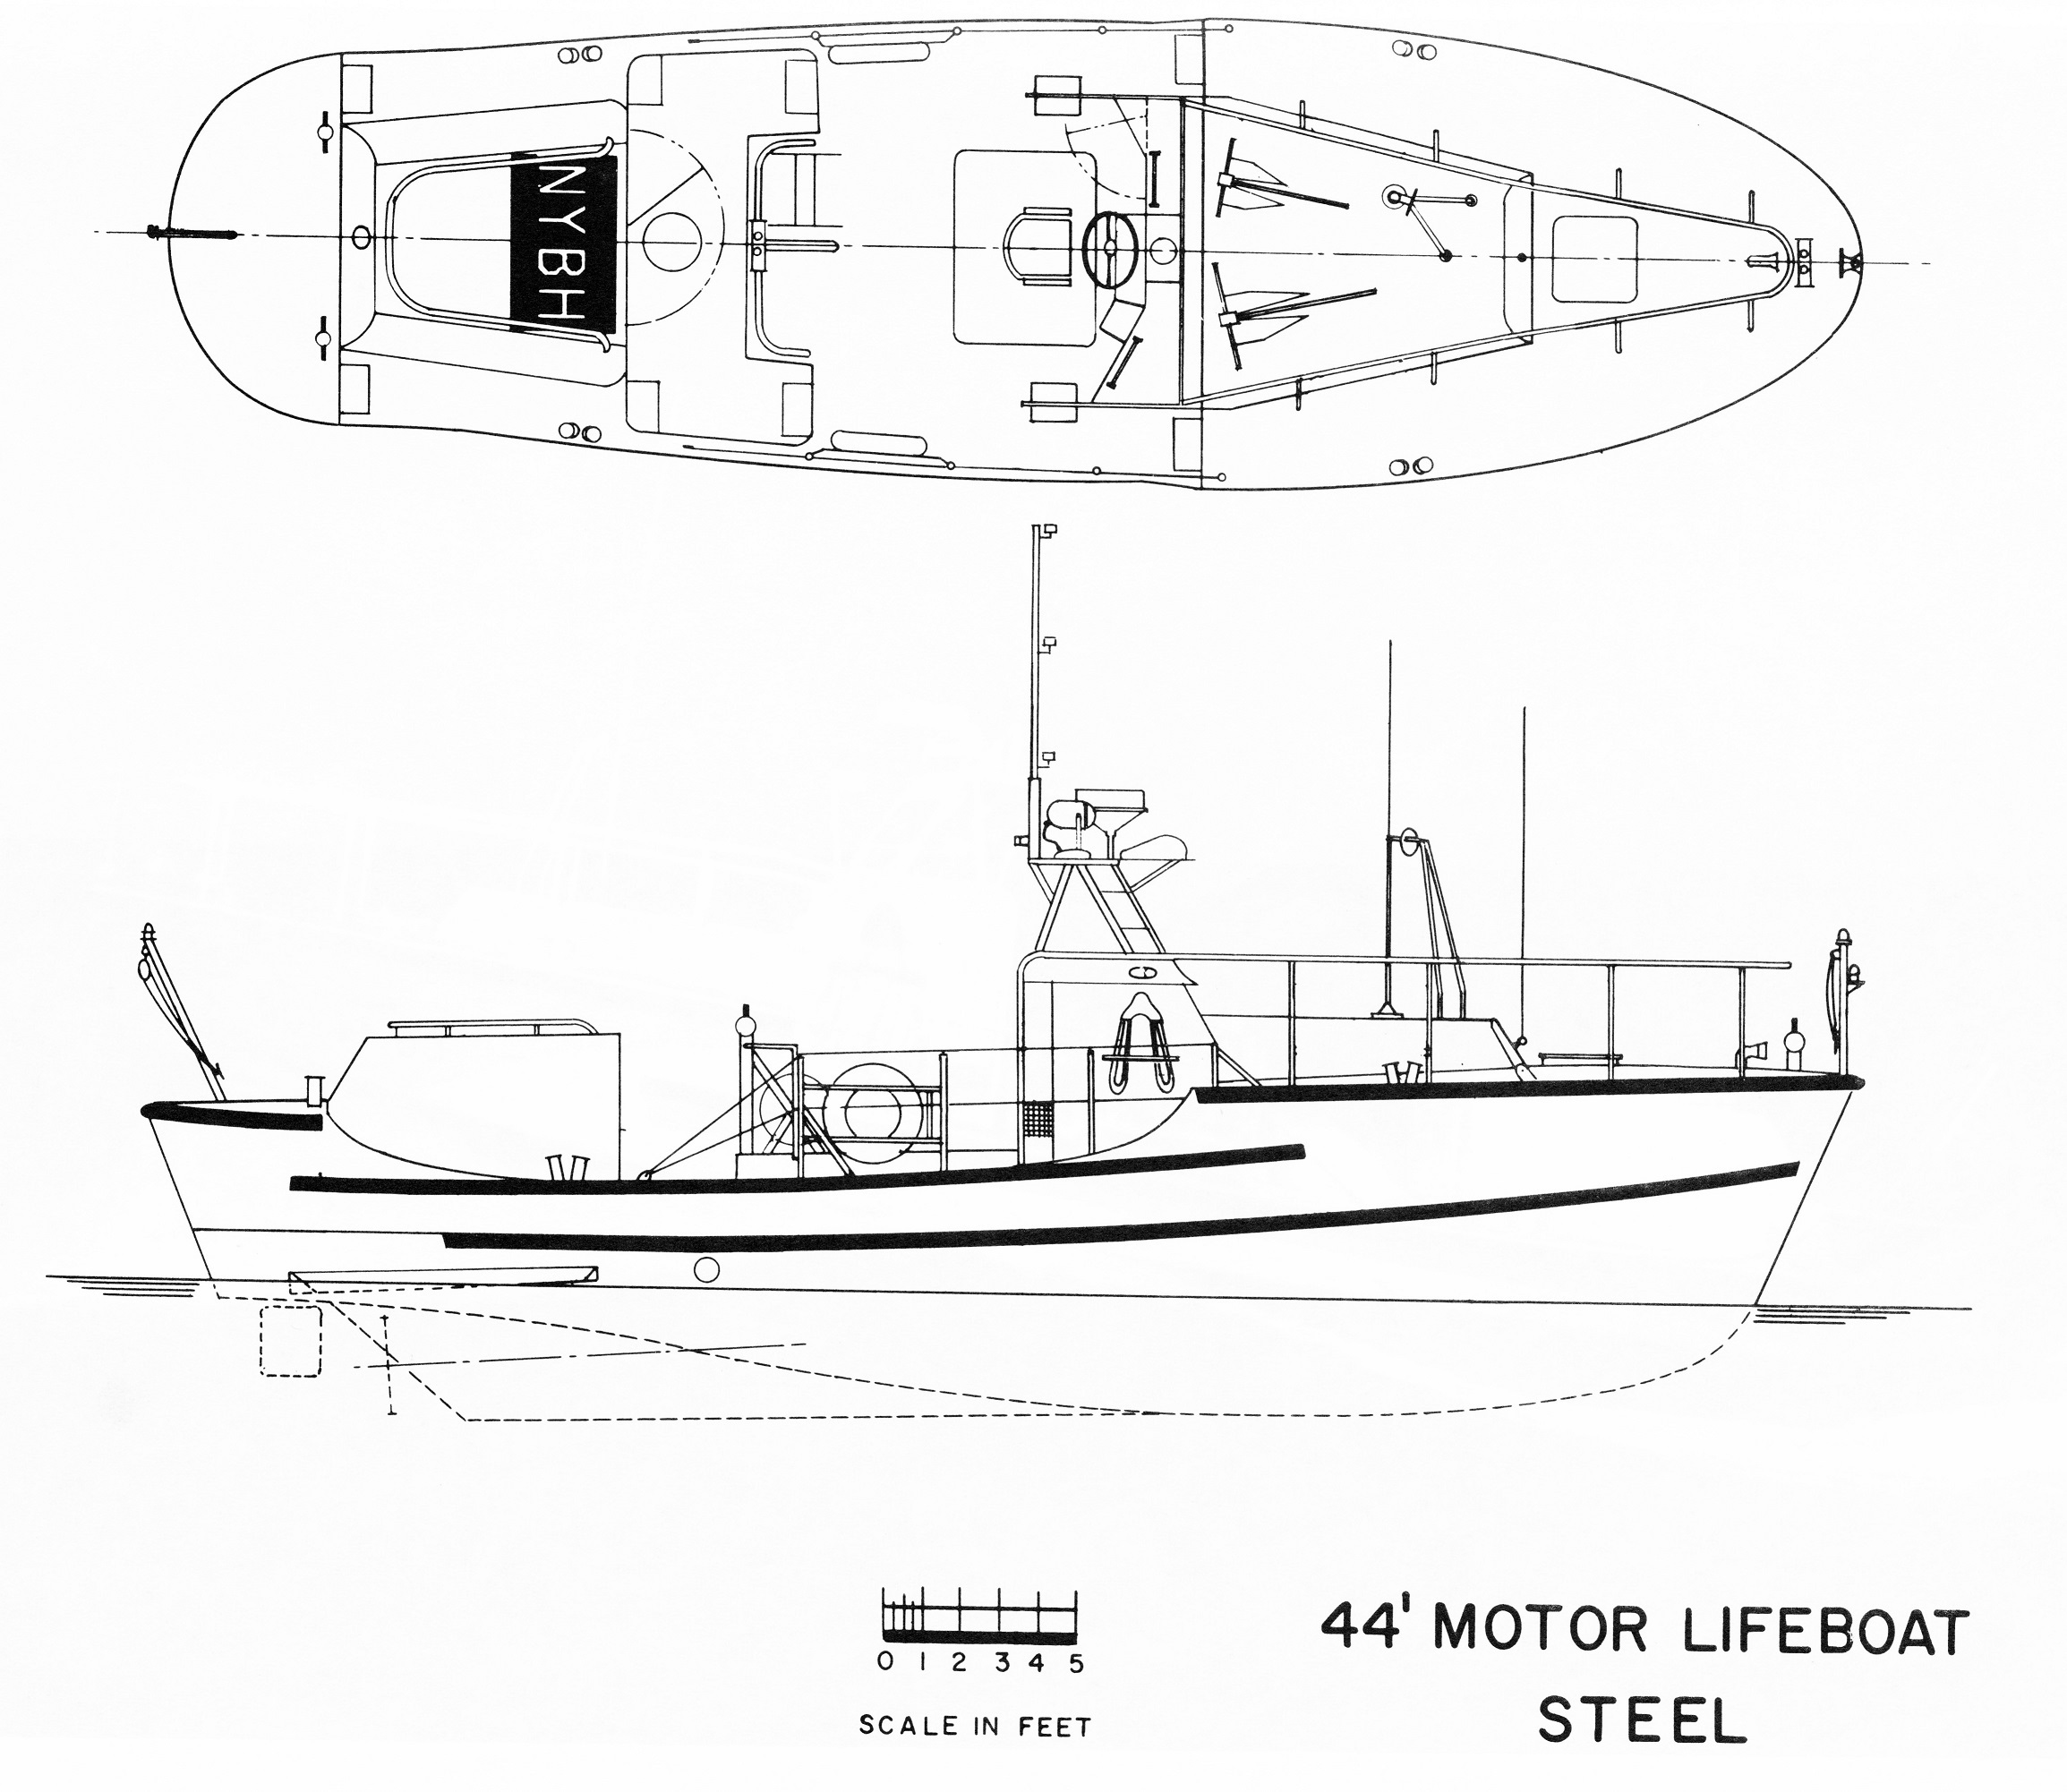 Profile view of the Coast Guard’s famed 44-foot utility boat, showing the dimensions and design of this very successful motor lifeboat. (U.S. Coast Guard)